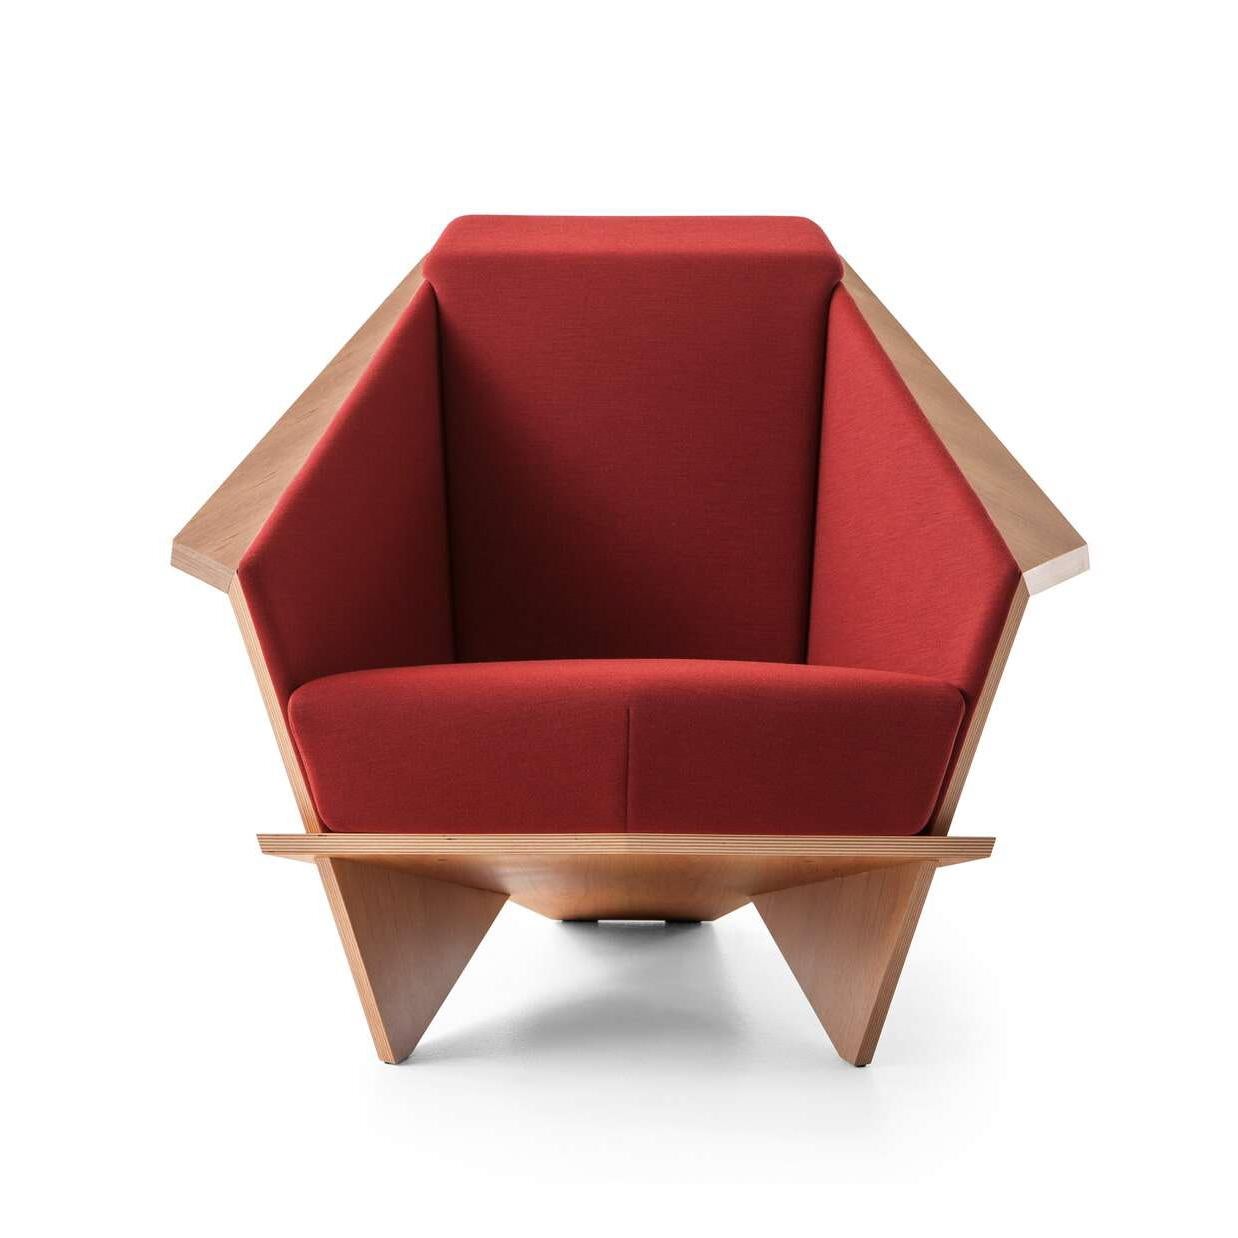 Armchair designed by Frank Lloyd Wrigh circa 1949, relaunched in 1986-90.
Manufactured by Cassina in Italy.

Origami in wood, emblematic of Frank Lloyd Wright’s design maturity and ever-surprising aesthetic code, this armchair was created in 1949